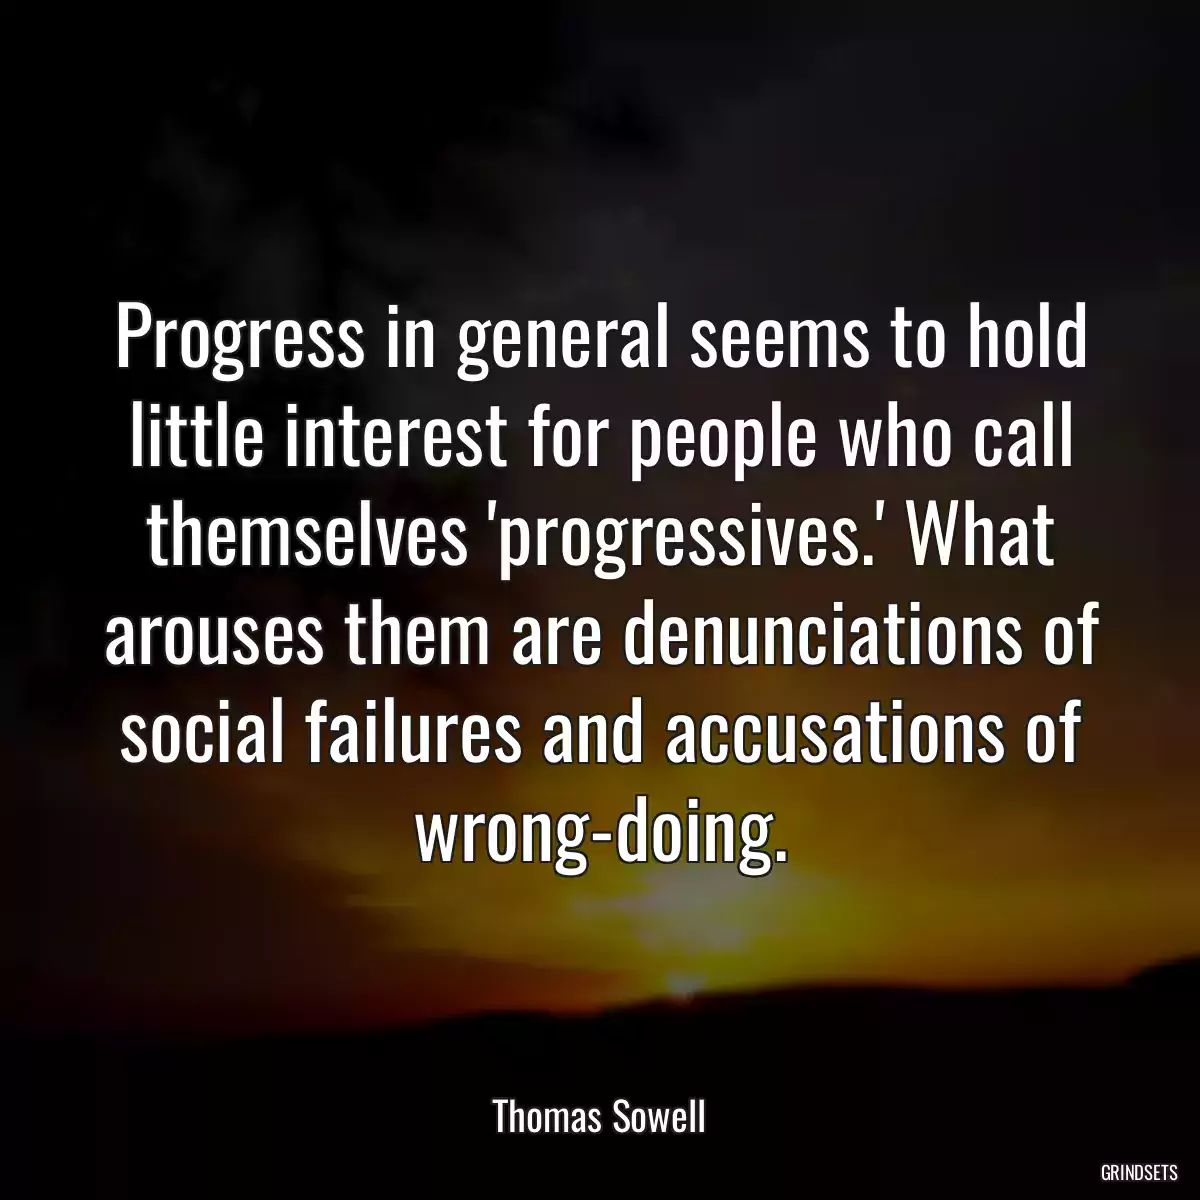 Progress in general seems to hold little interest for people who call themselves \'progressives.\' What arouses them are denunciations of social failures and accusations of wrong-doing.